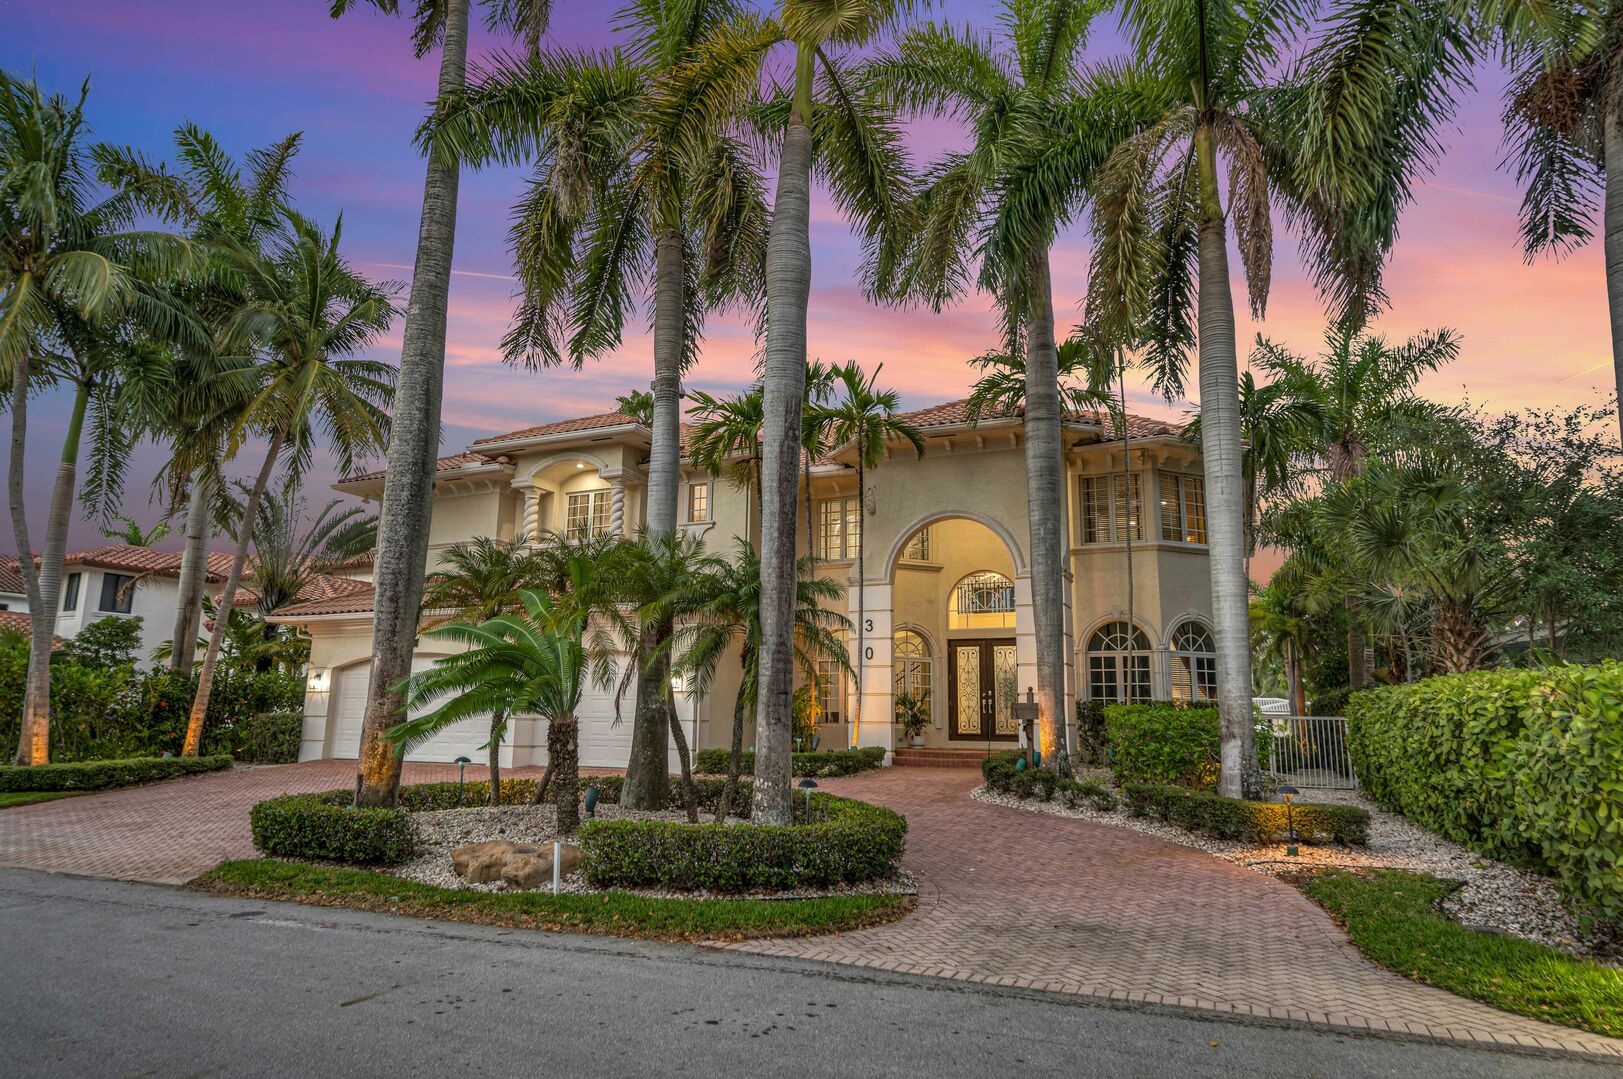 Nestled in the middle of Nurmi Isles just off the picturesque Las Olas Blvd.